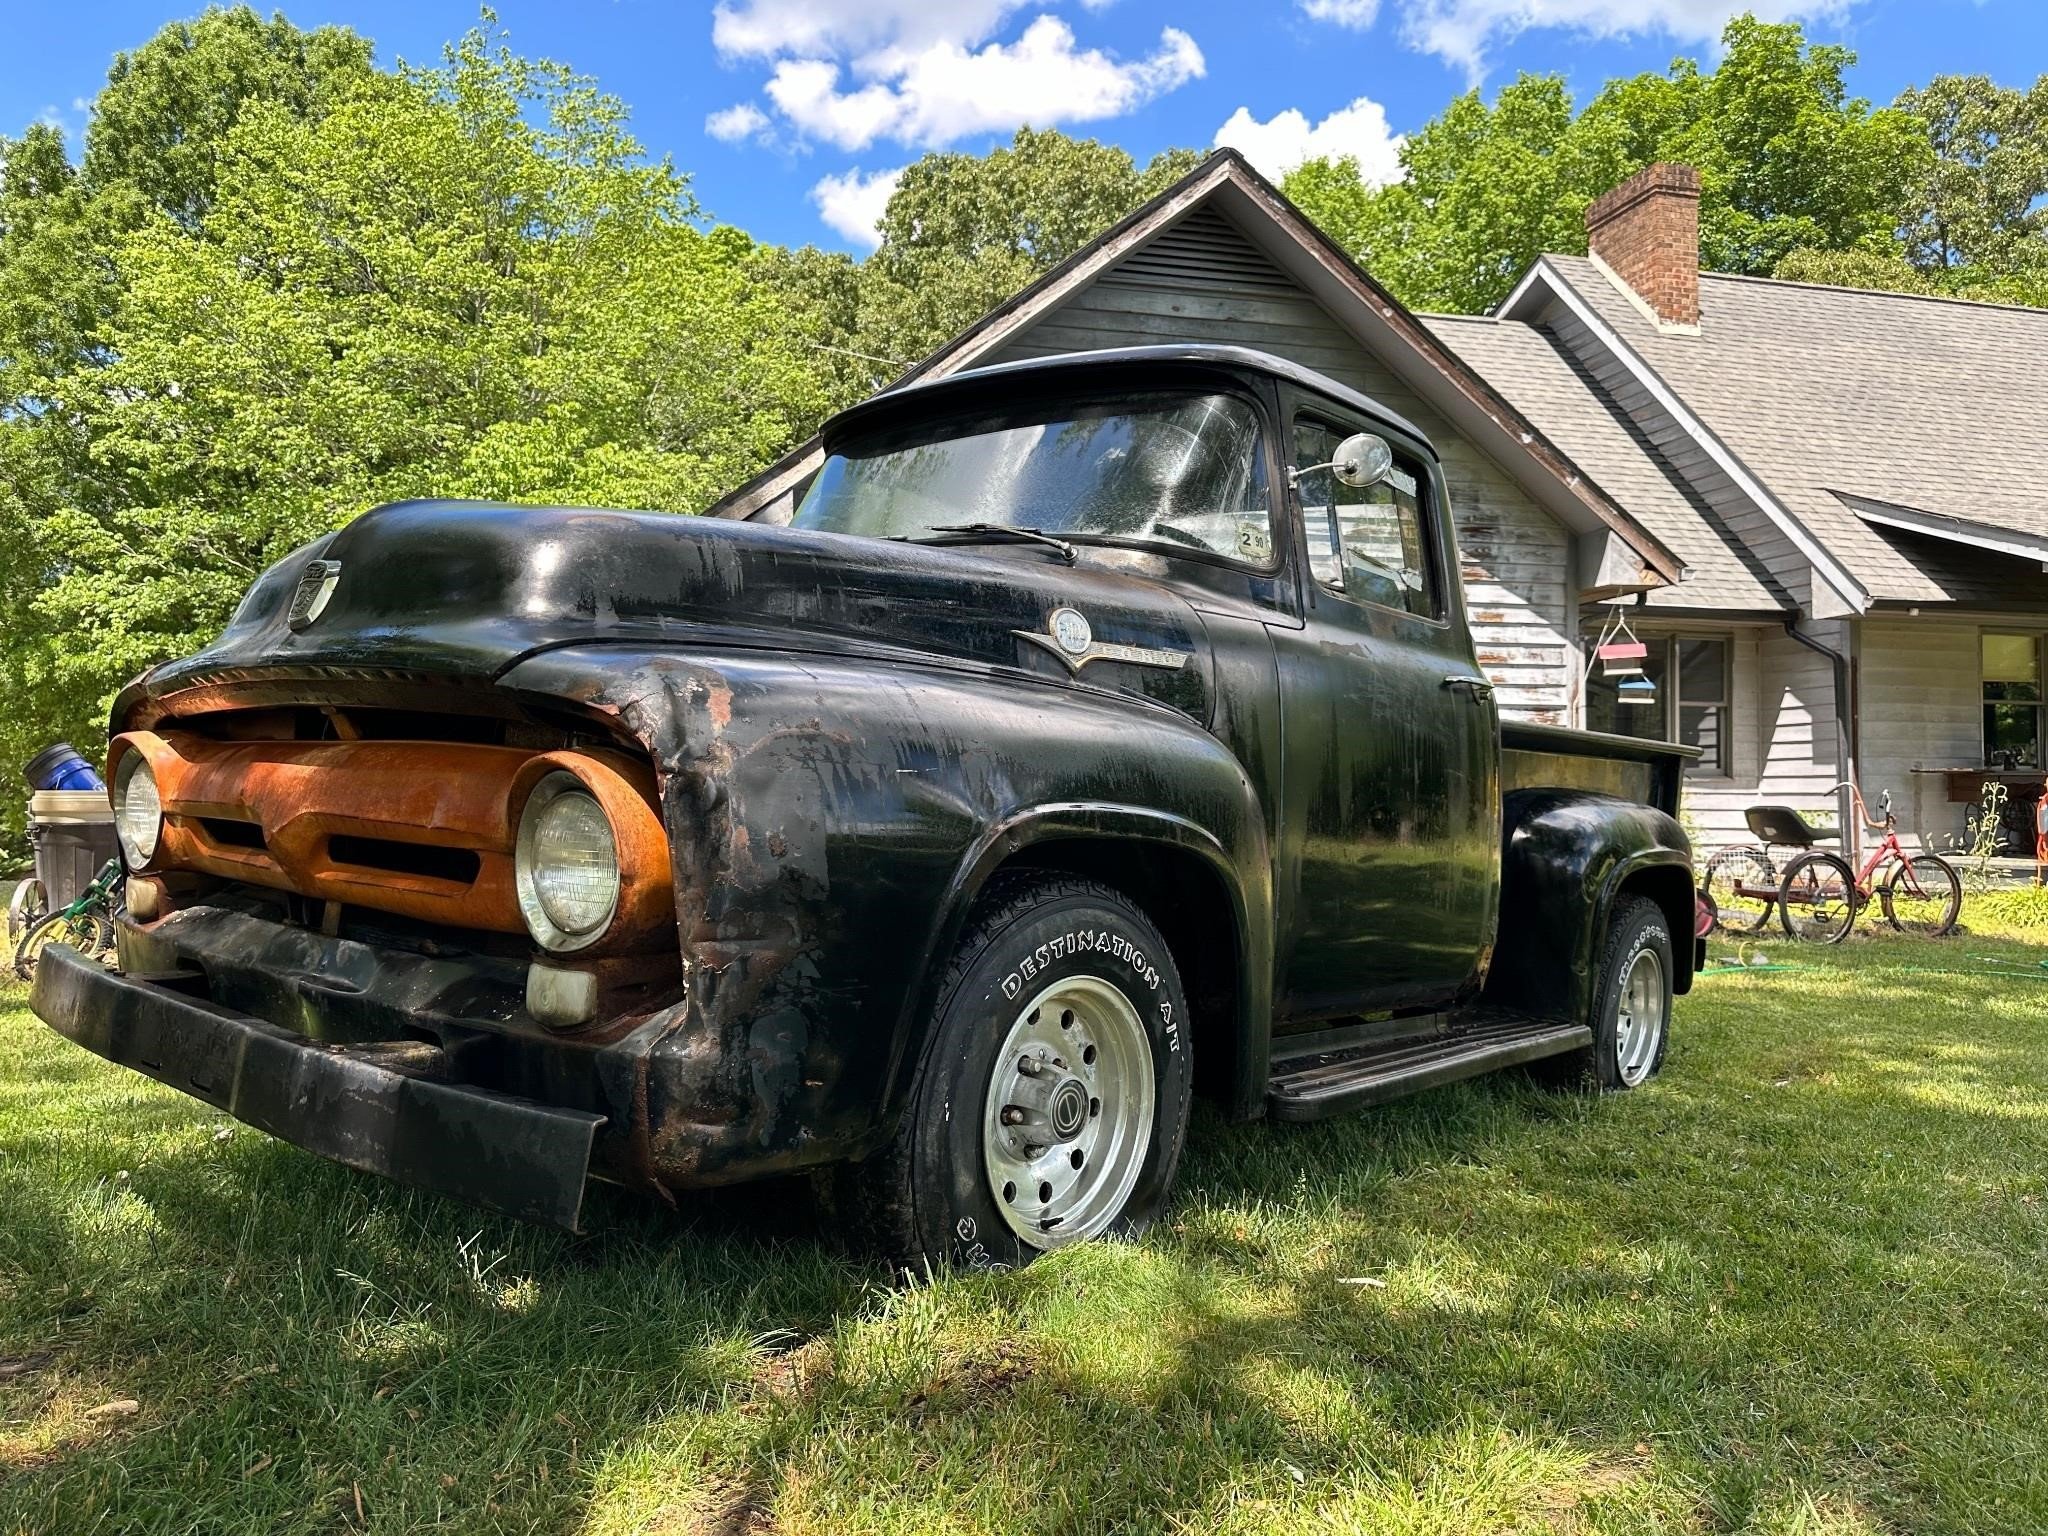 1956 Ford F-100 not running “as is” with title